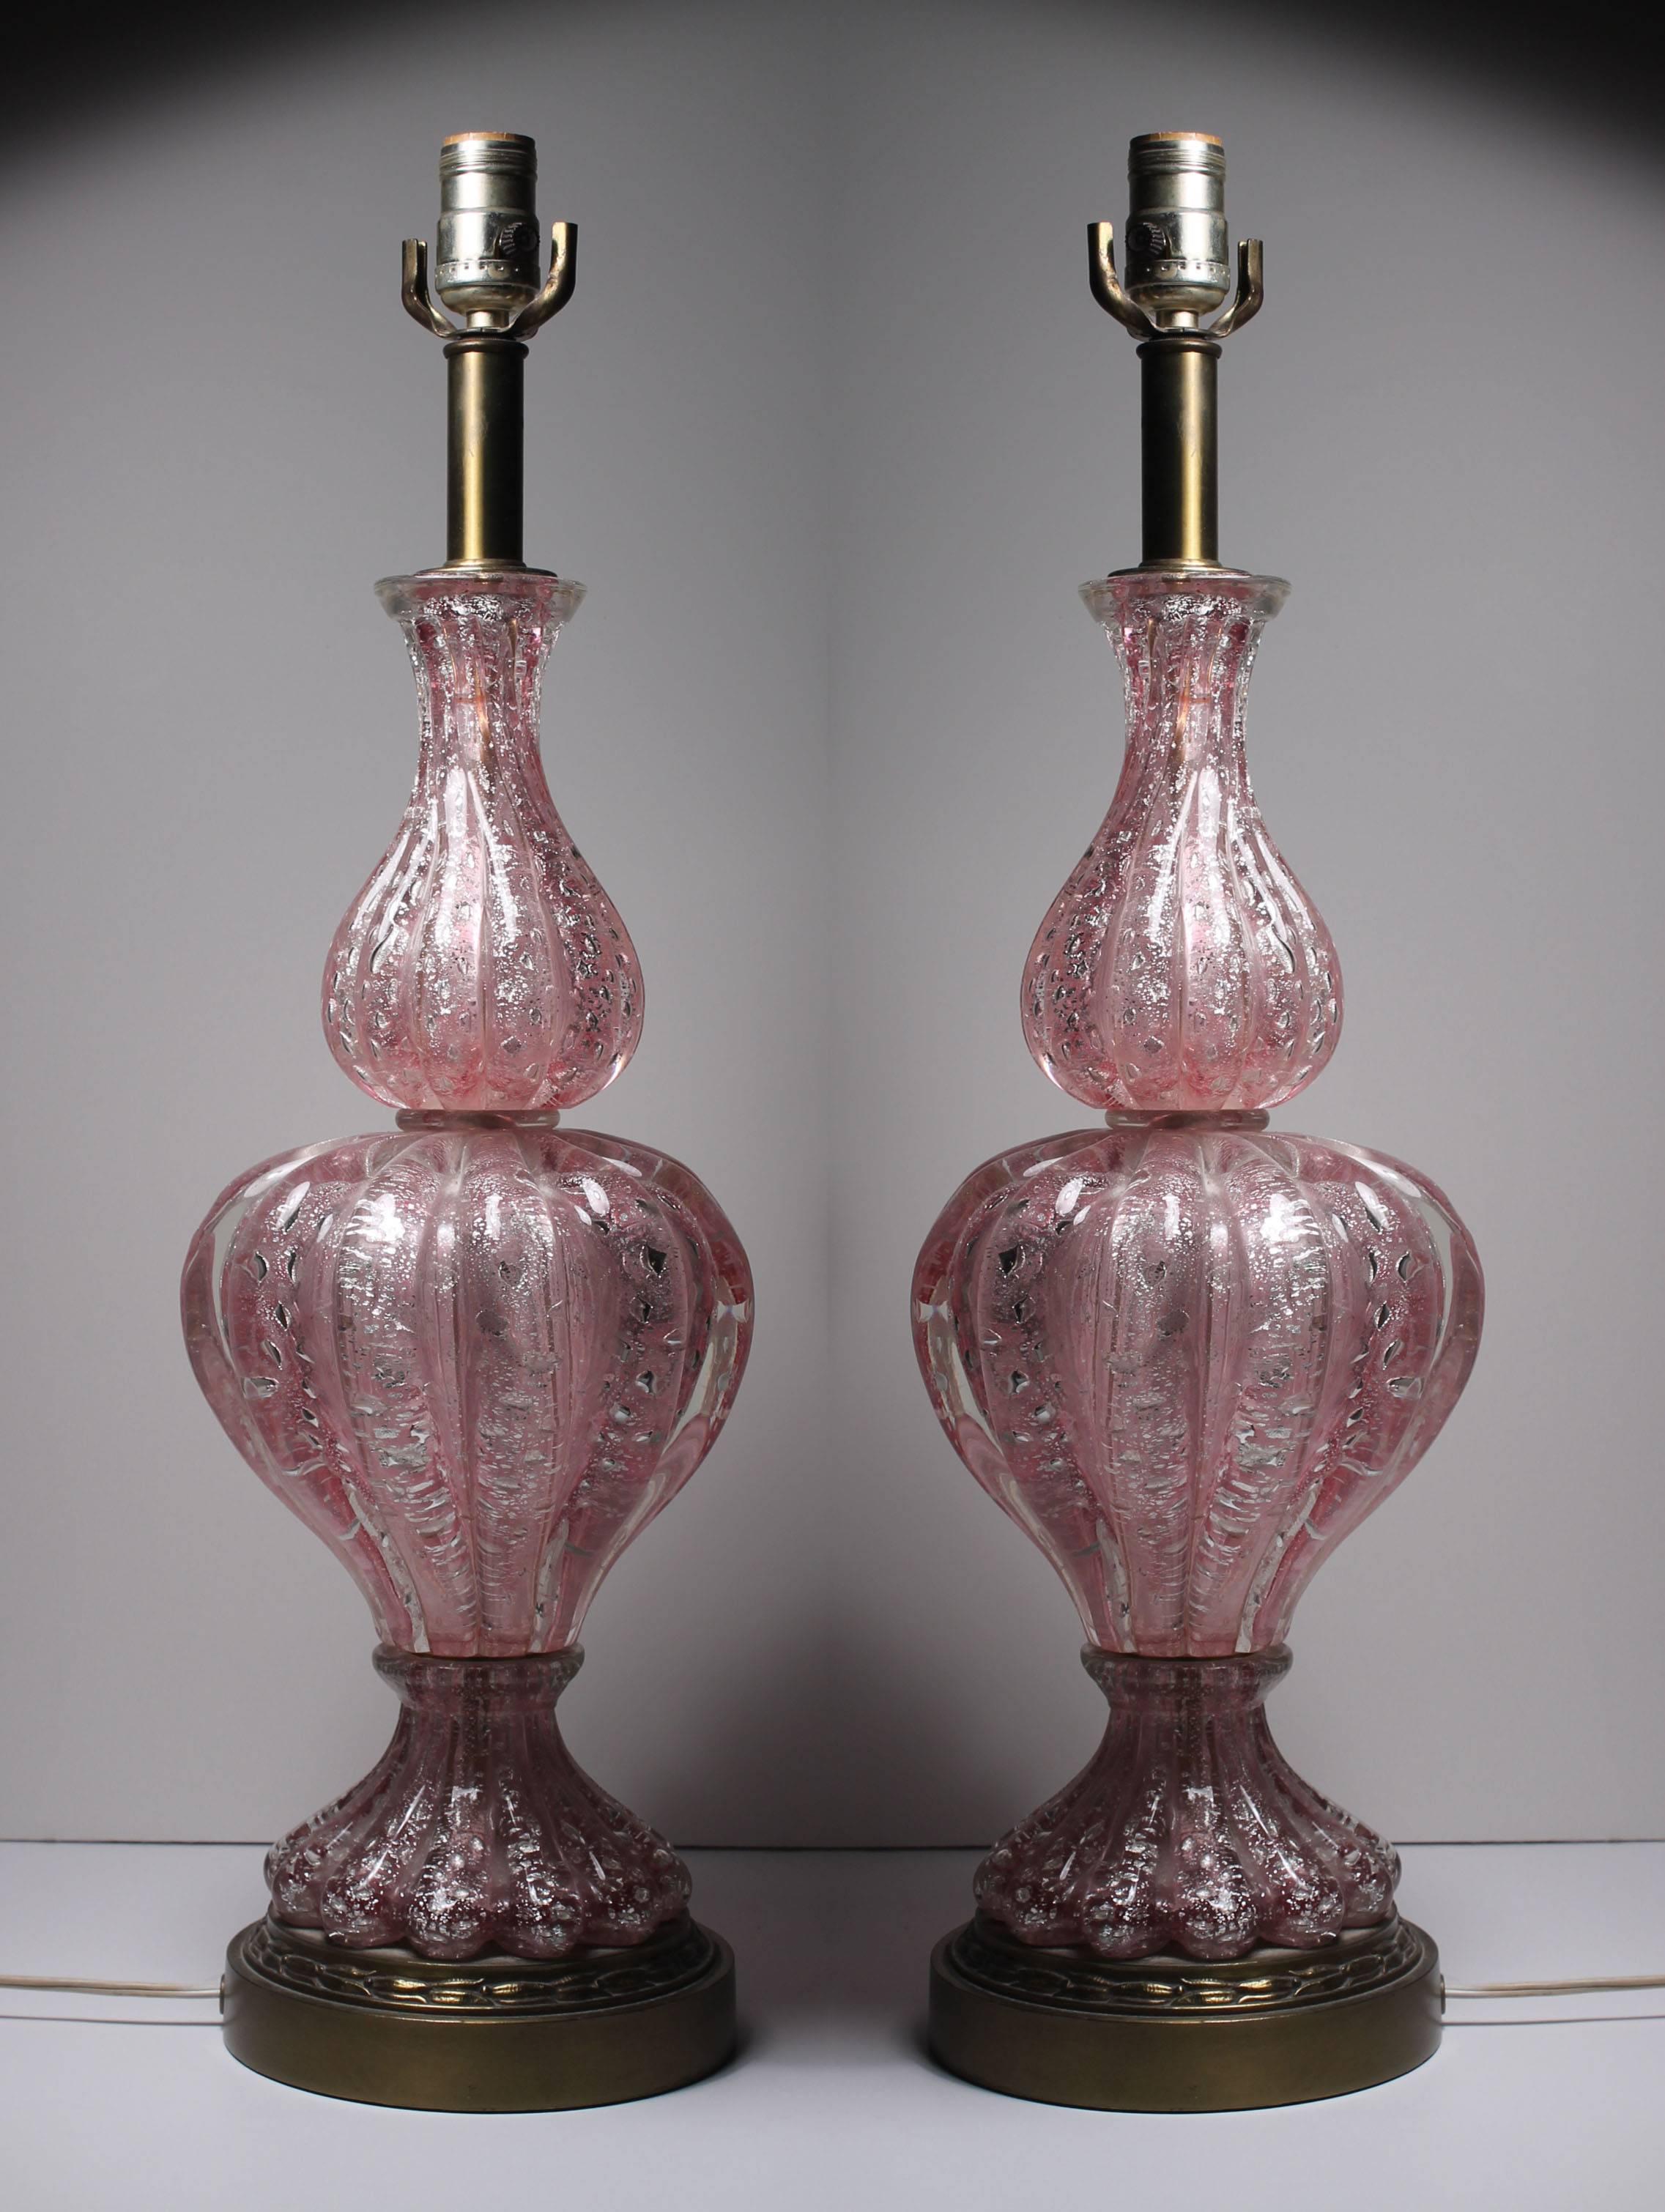 Pair of pink Murano glass lamps with silver foil by Barovier.

Measures: 25